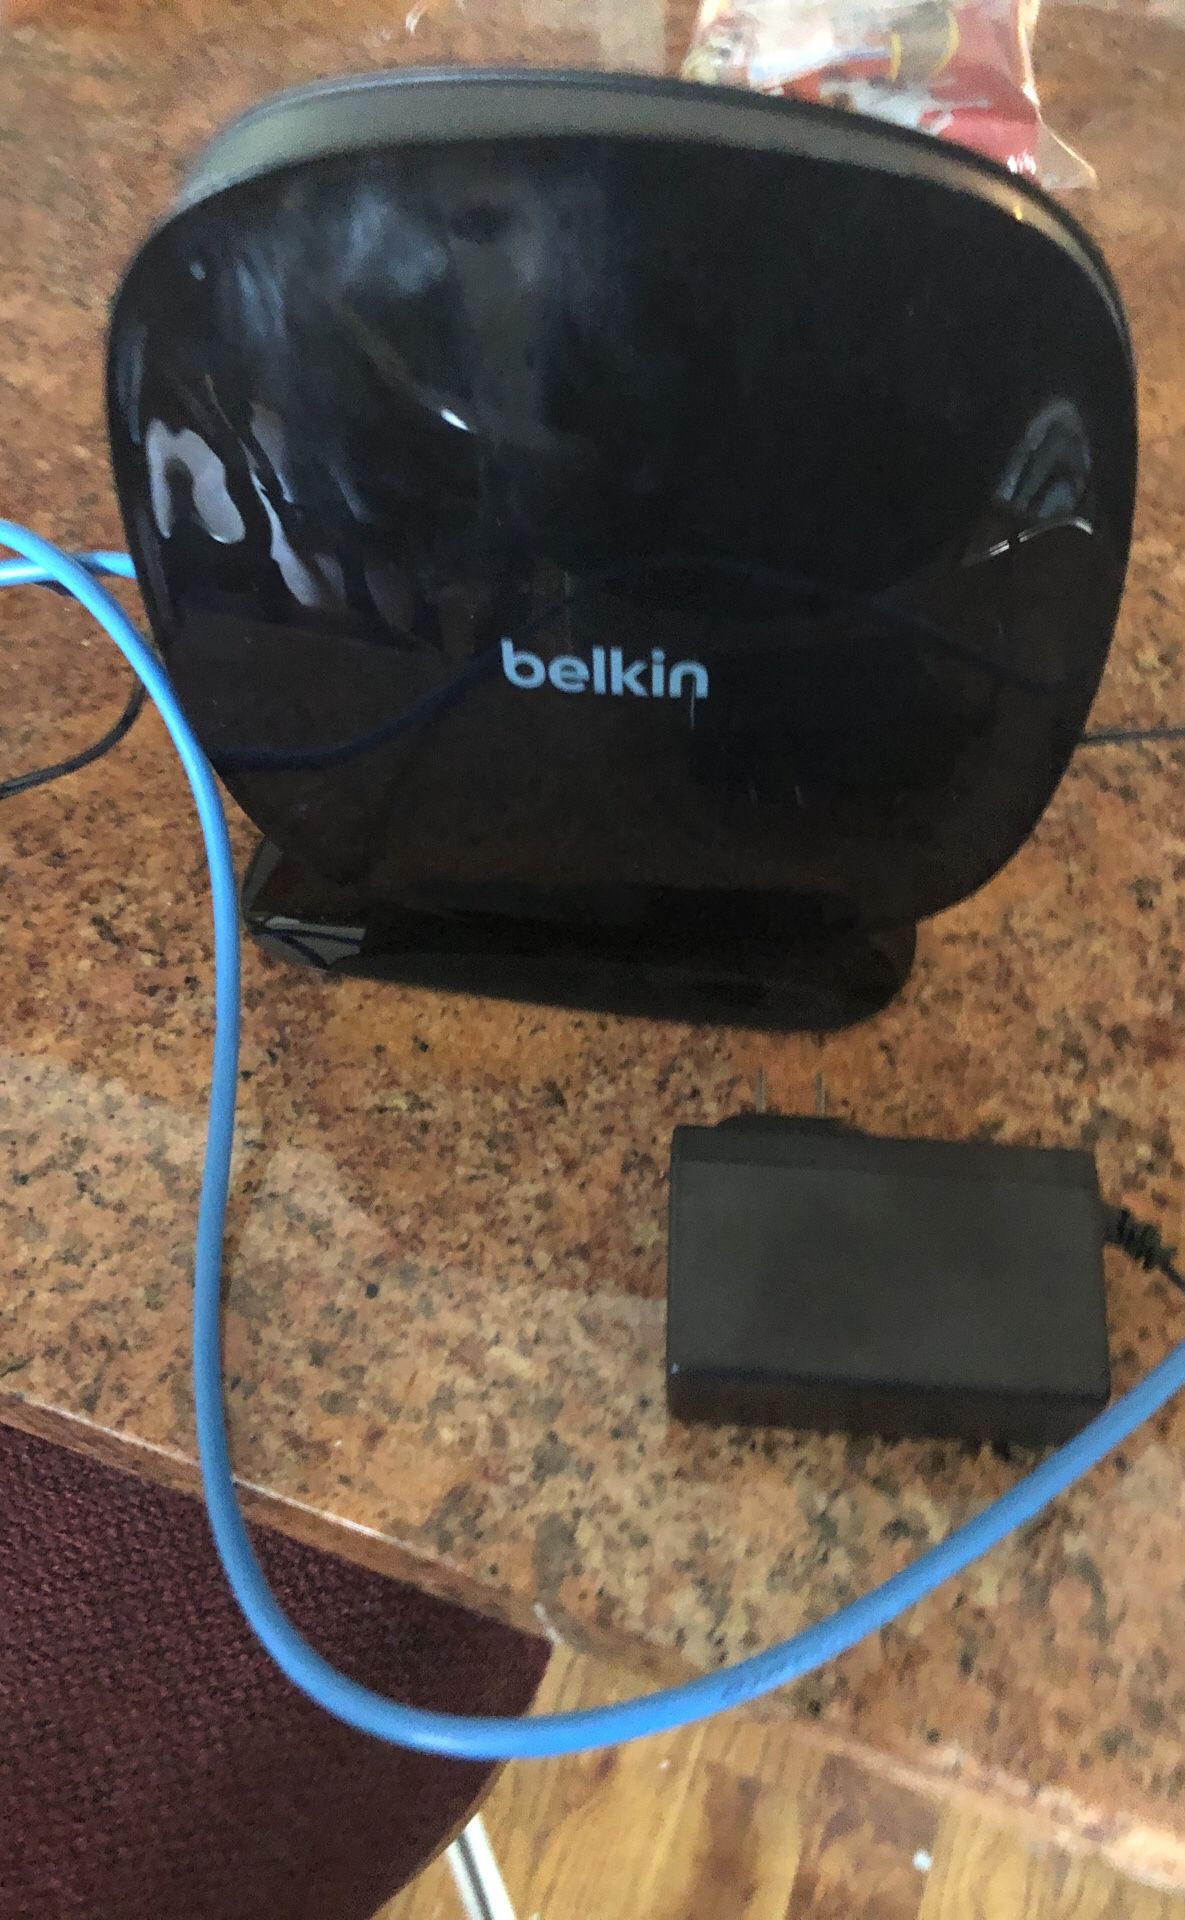 Belkin AC1600 DB dual-band router